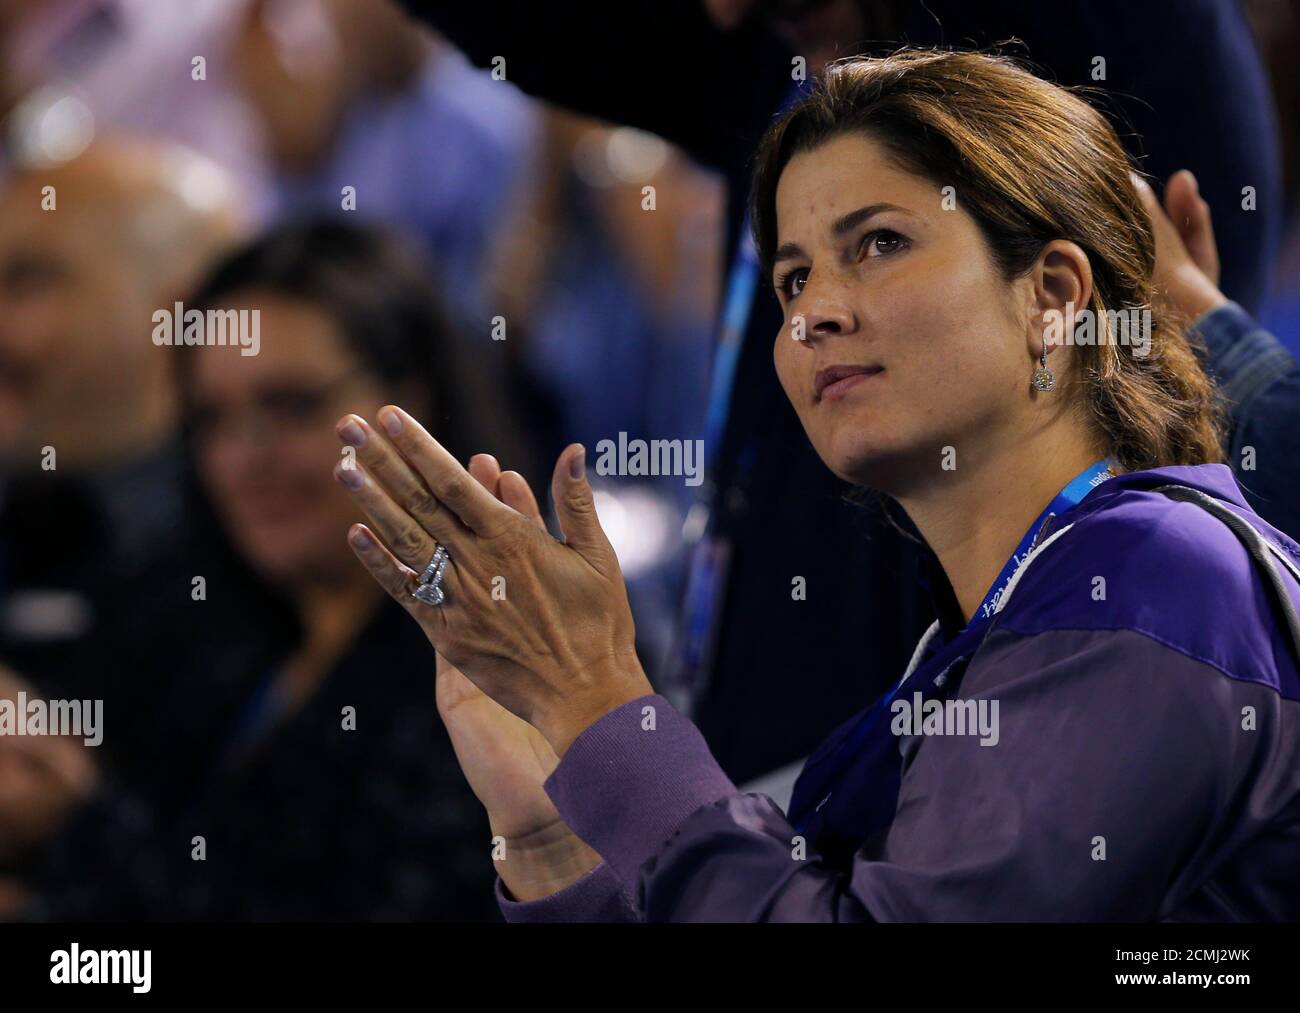 Mirka Federer, wife of Roger Federer of Switzerland, applauds as he gives  an interview after he defeated Jo-Wilfried Tsonga of France in their men's  singles quarter-final match at the Australian Open tennis